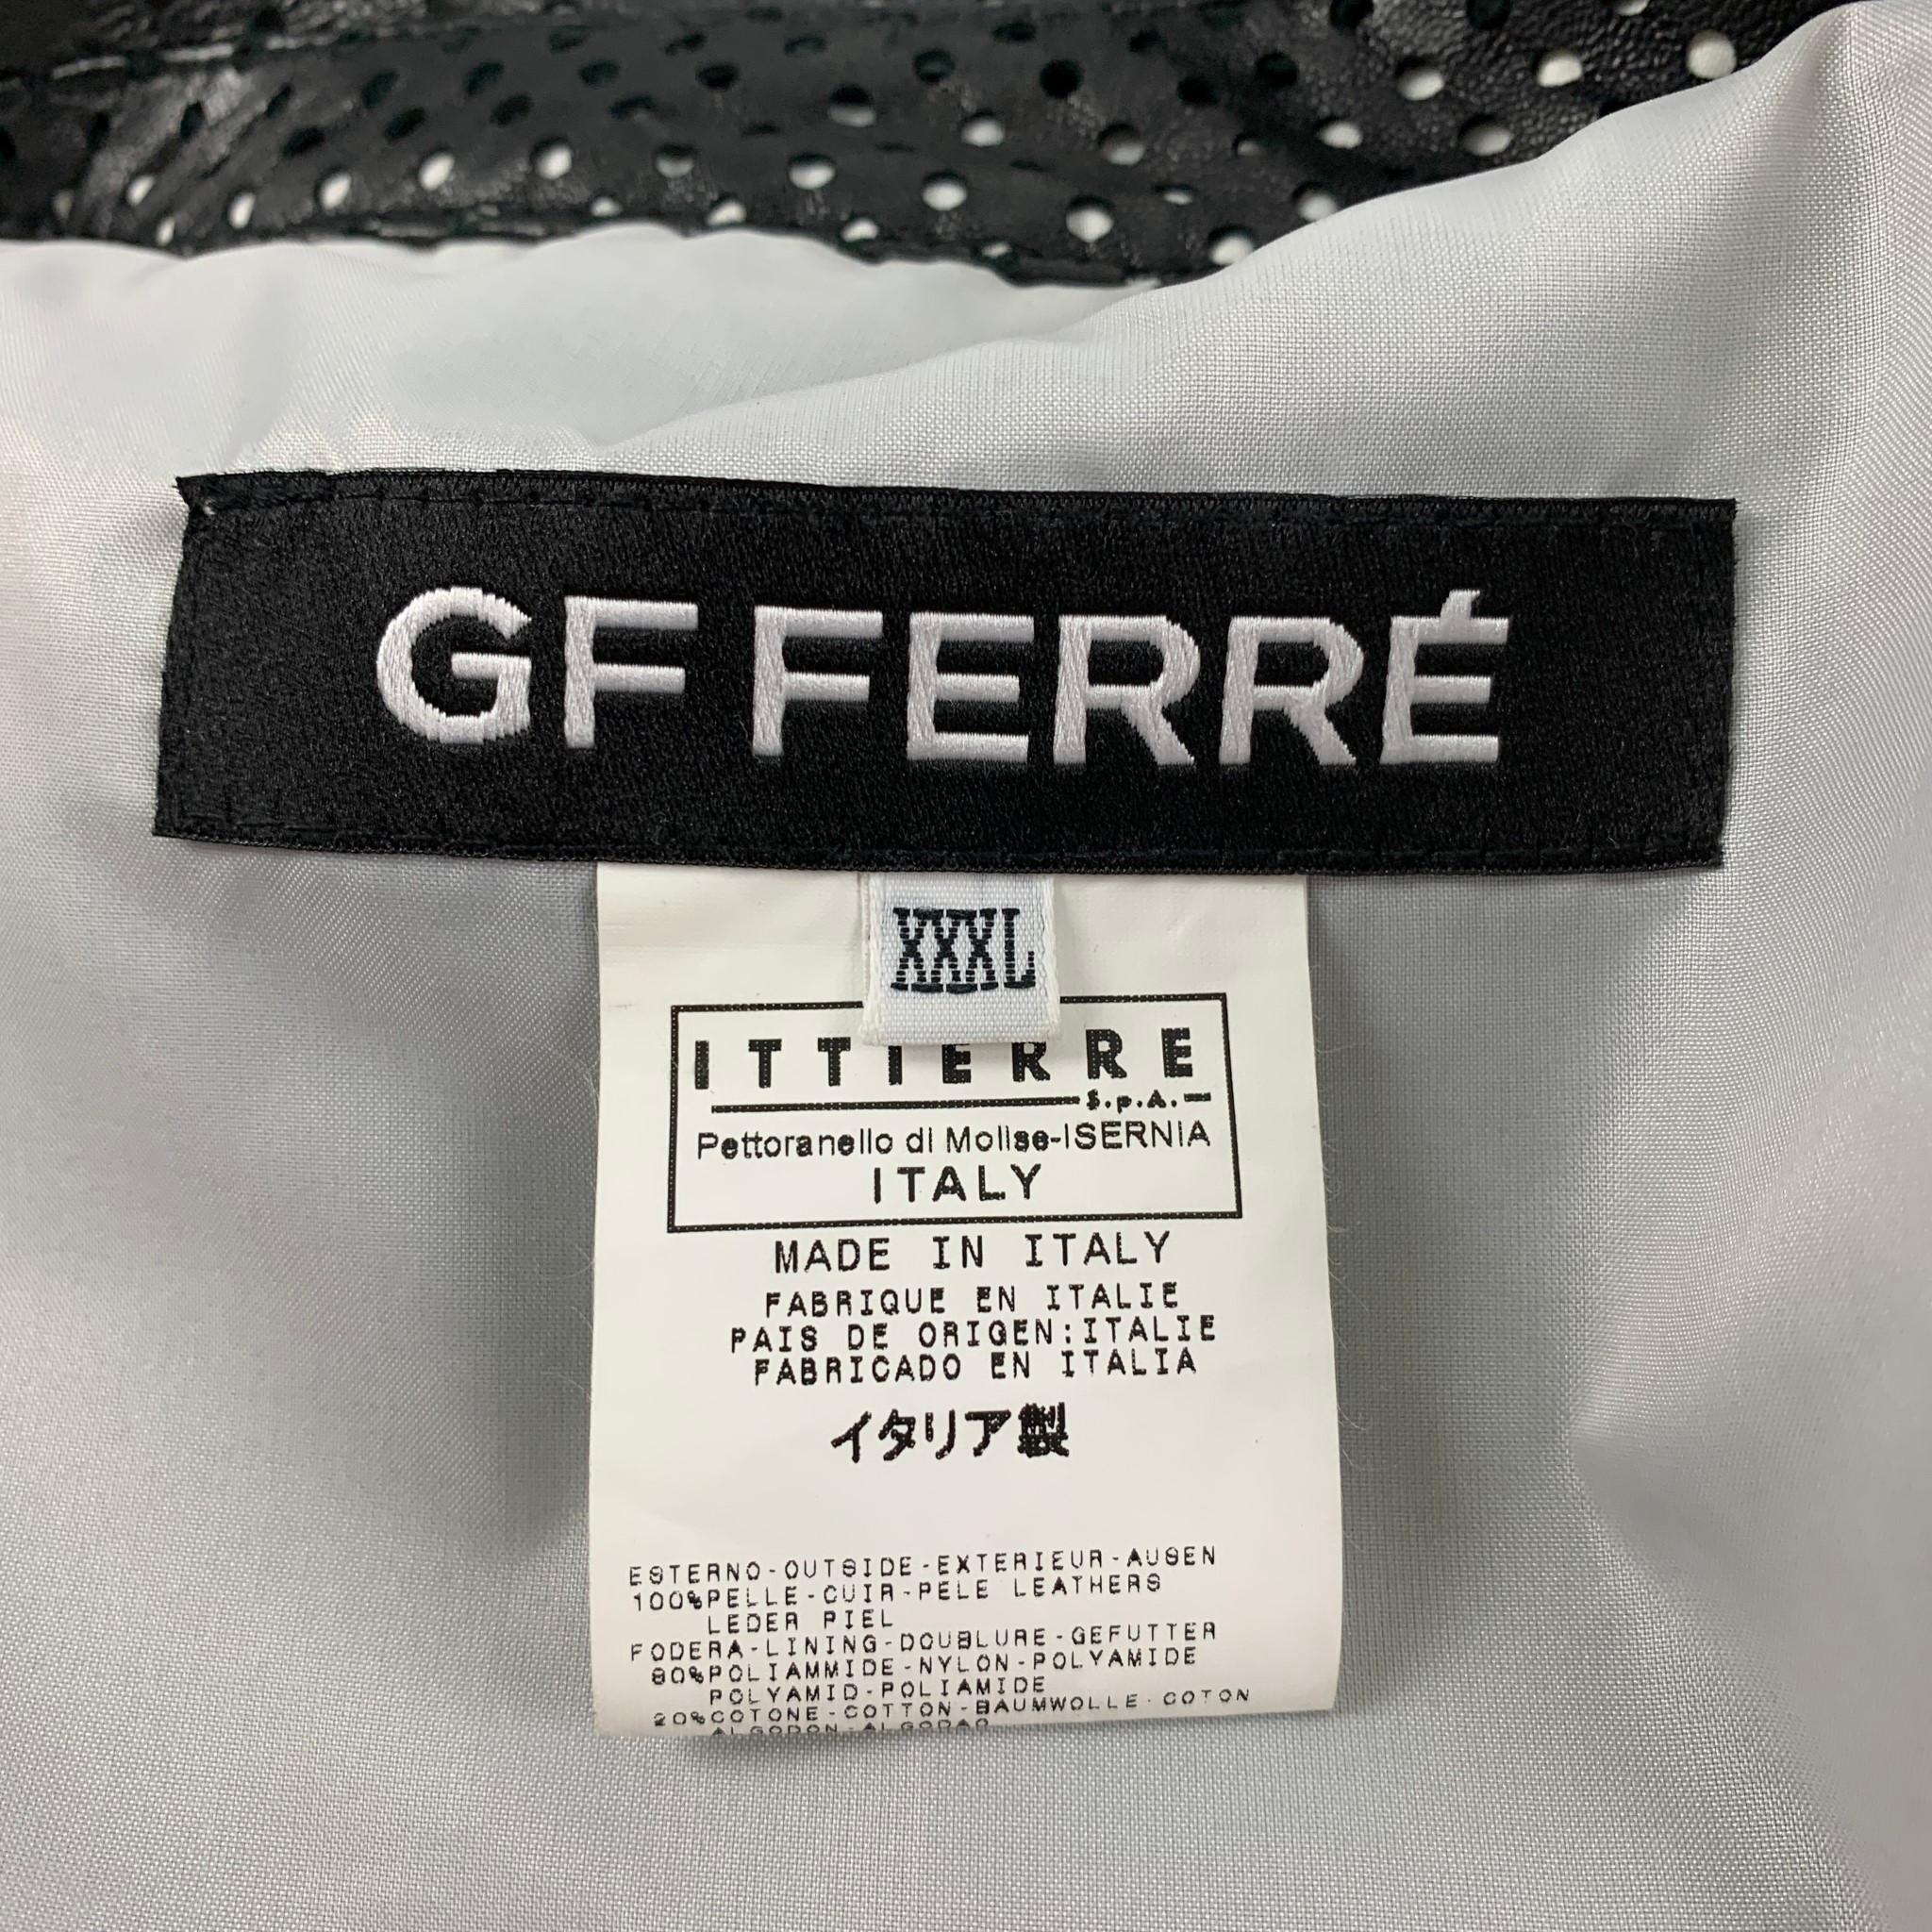 GIANFRANCO FERRE jacket comes in a black & white perforated leather featuring a biker style, detachable sleeves, front pockets, and a zip up closure. Made in Italy.

Very Good Pre-Owned Condition.
Marked: XXXL

Measurements:

Shoulder: 18 in.
Chest: